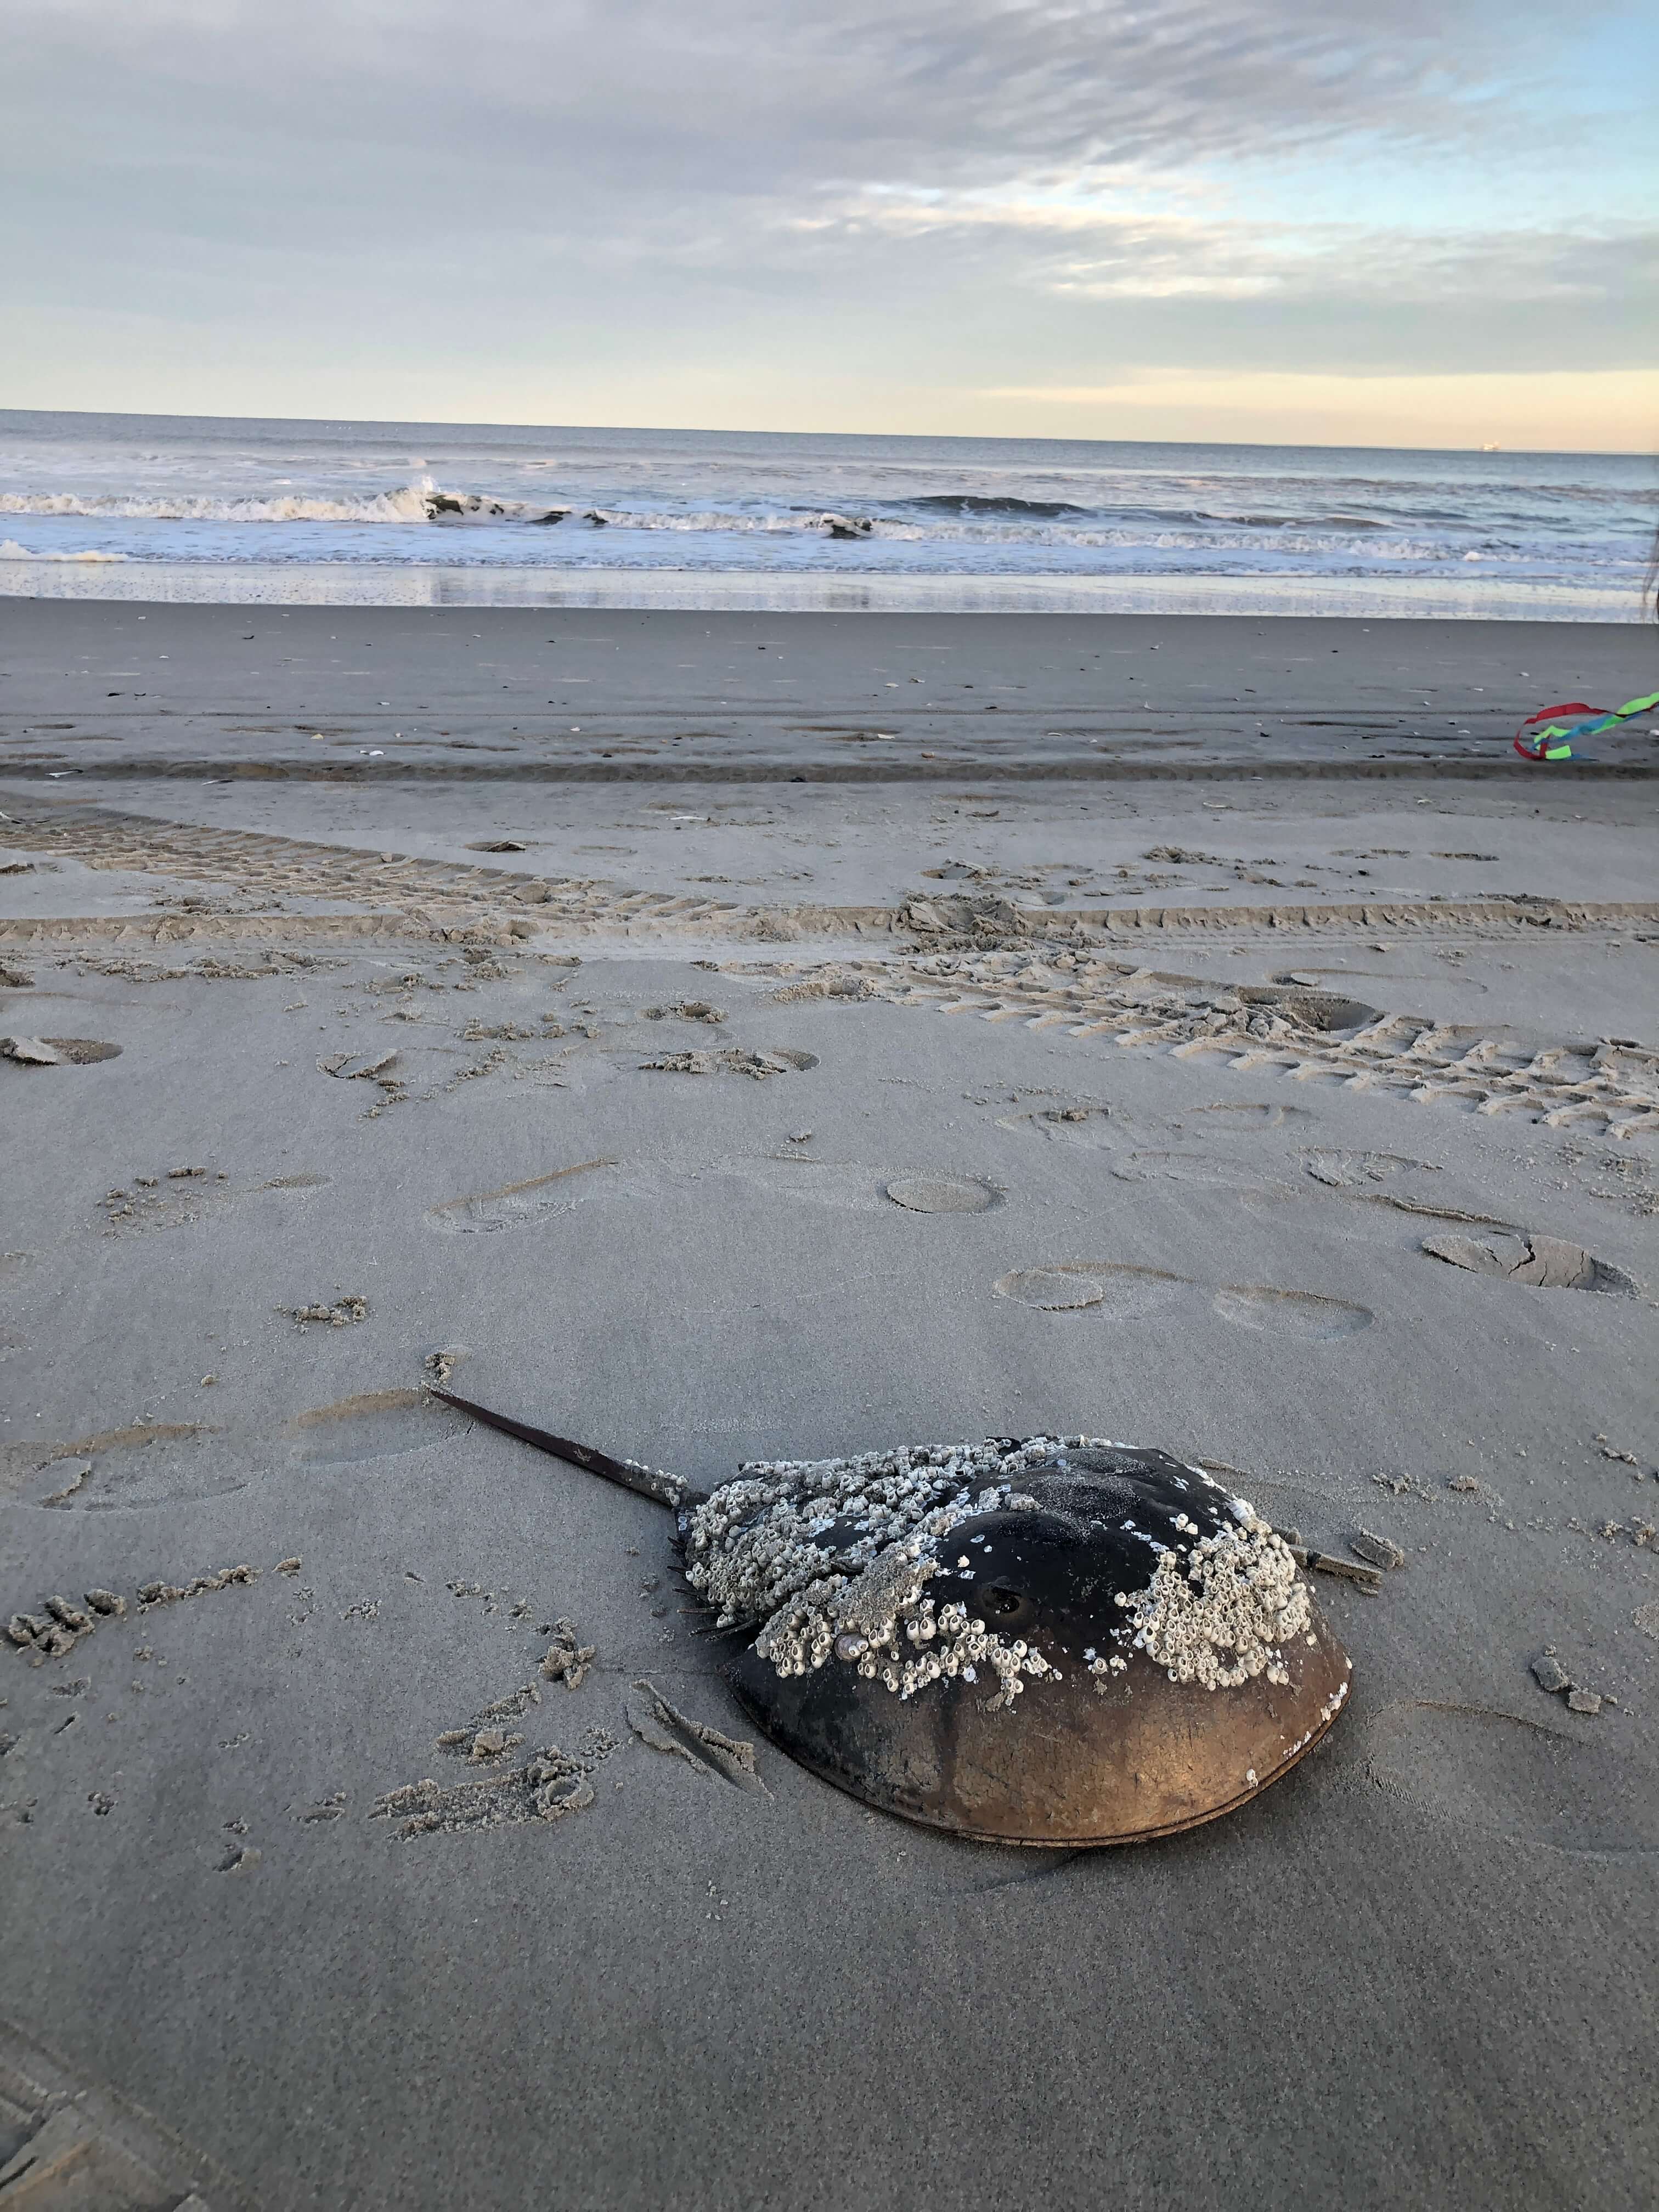 a stingray washed ashore in front of the surf